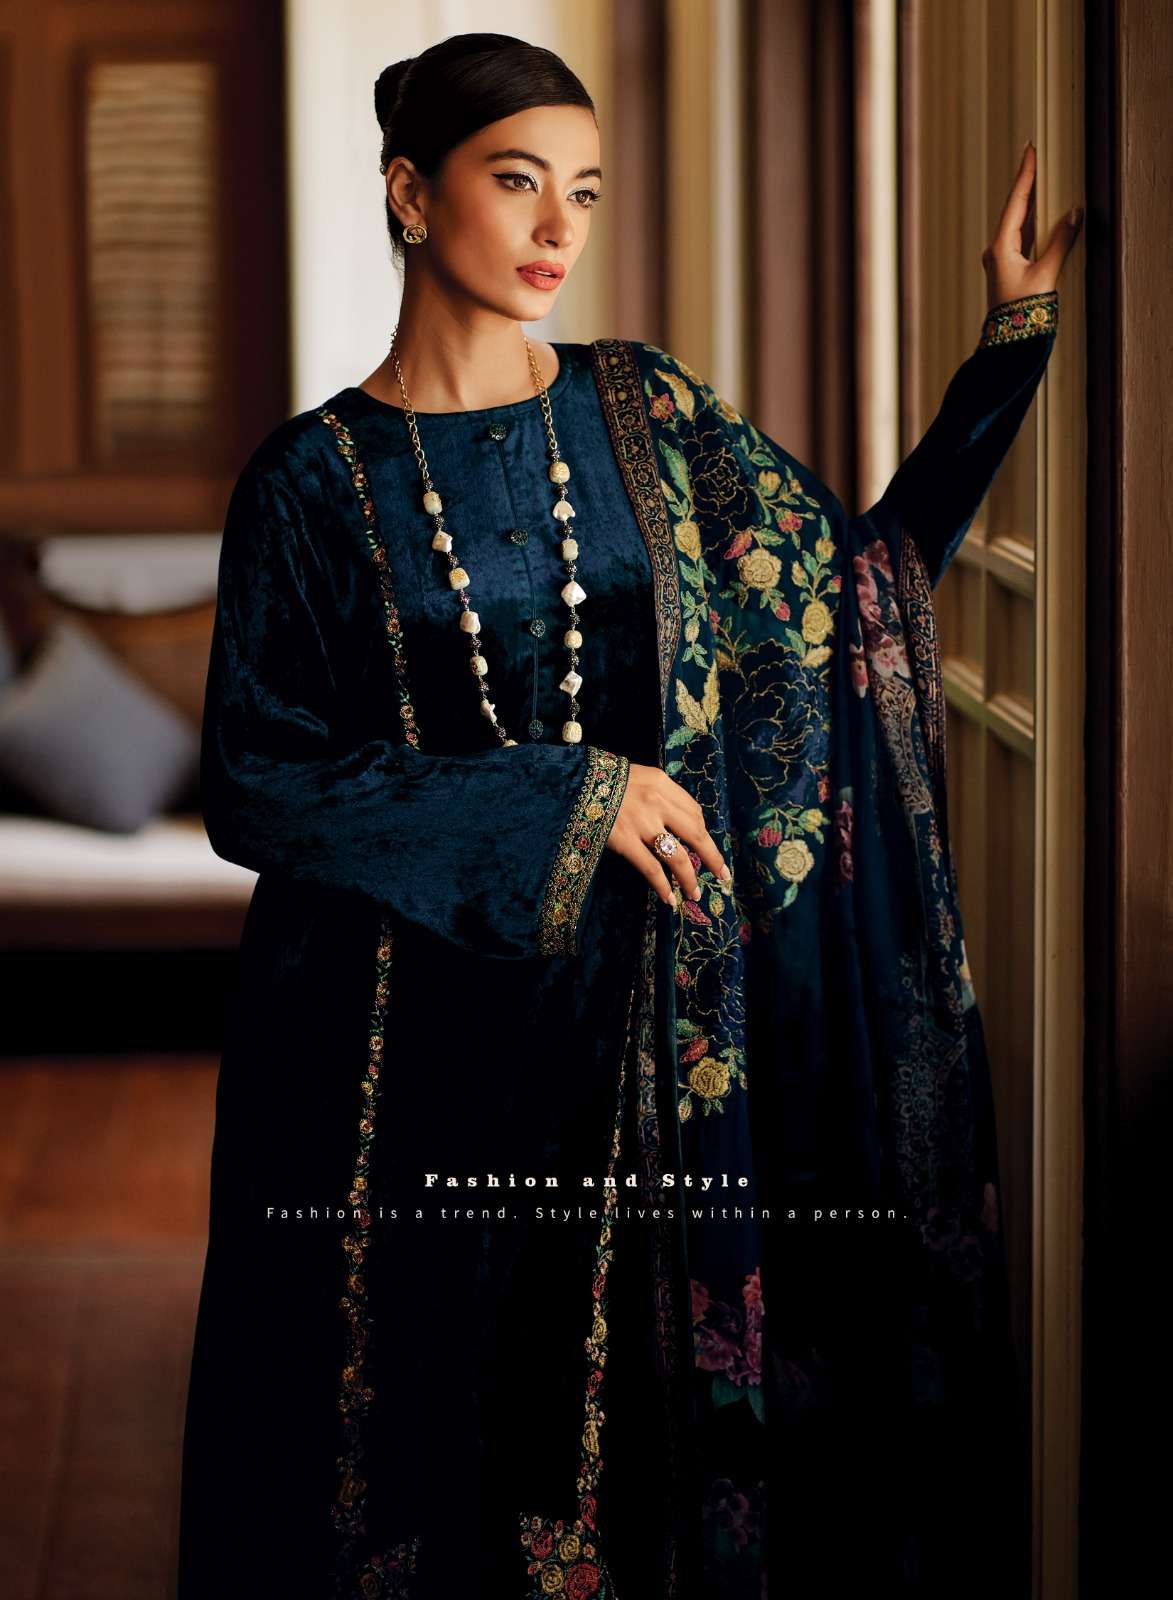 Varsha fashion petals 01-06 series velvet embroidery work salwar suits winter collection wholesale rates